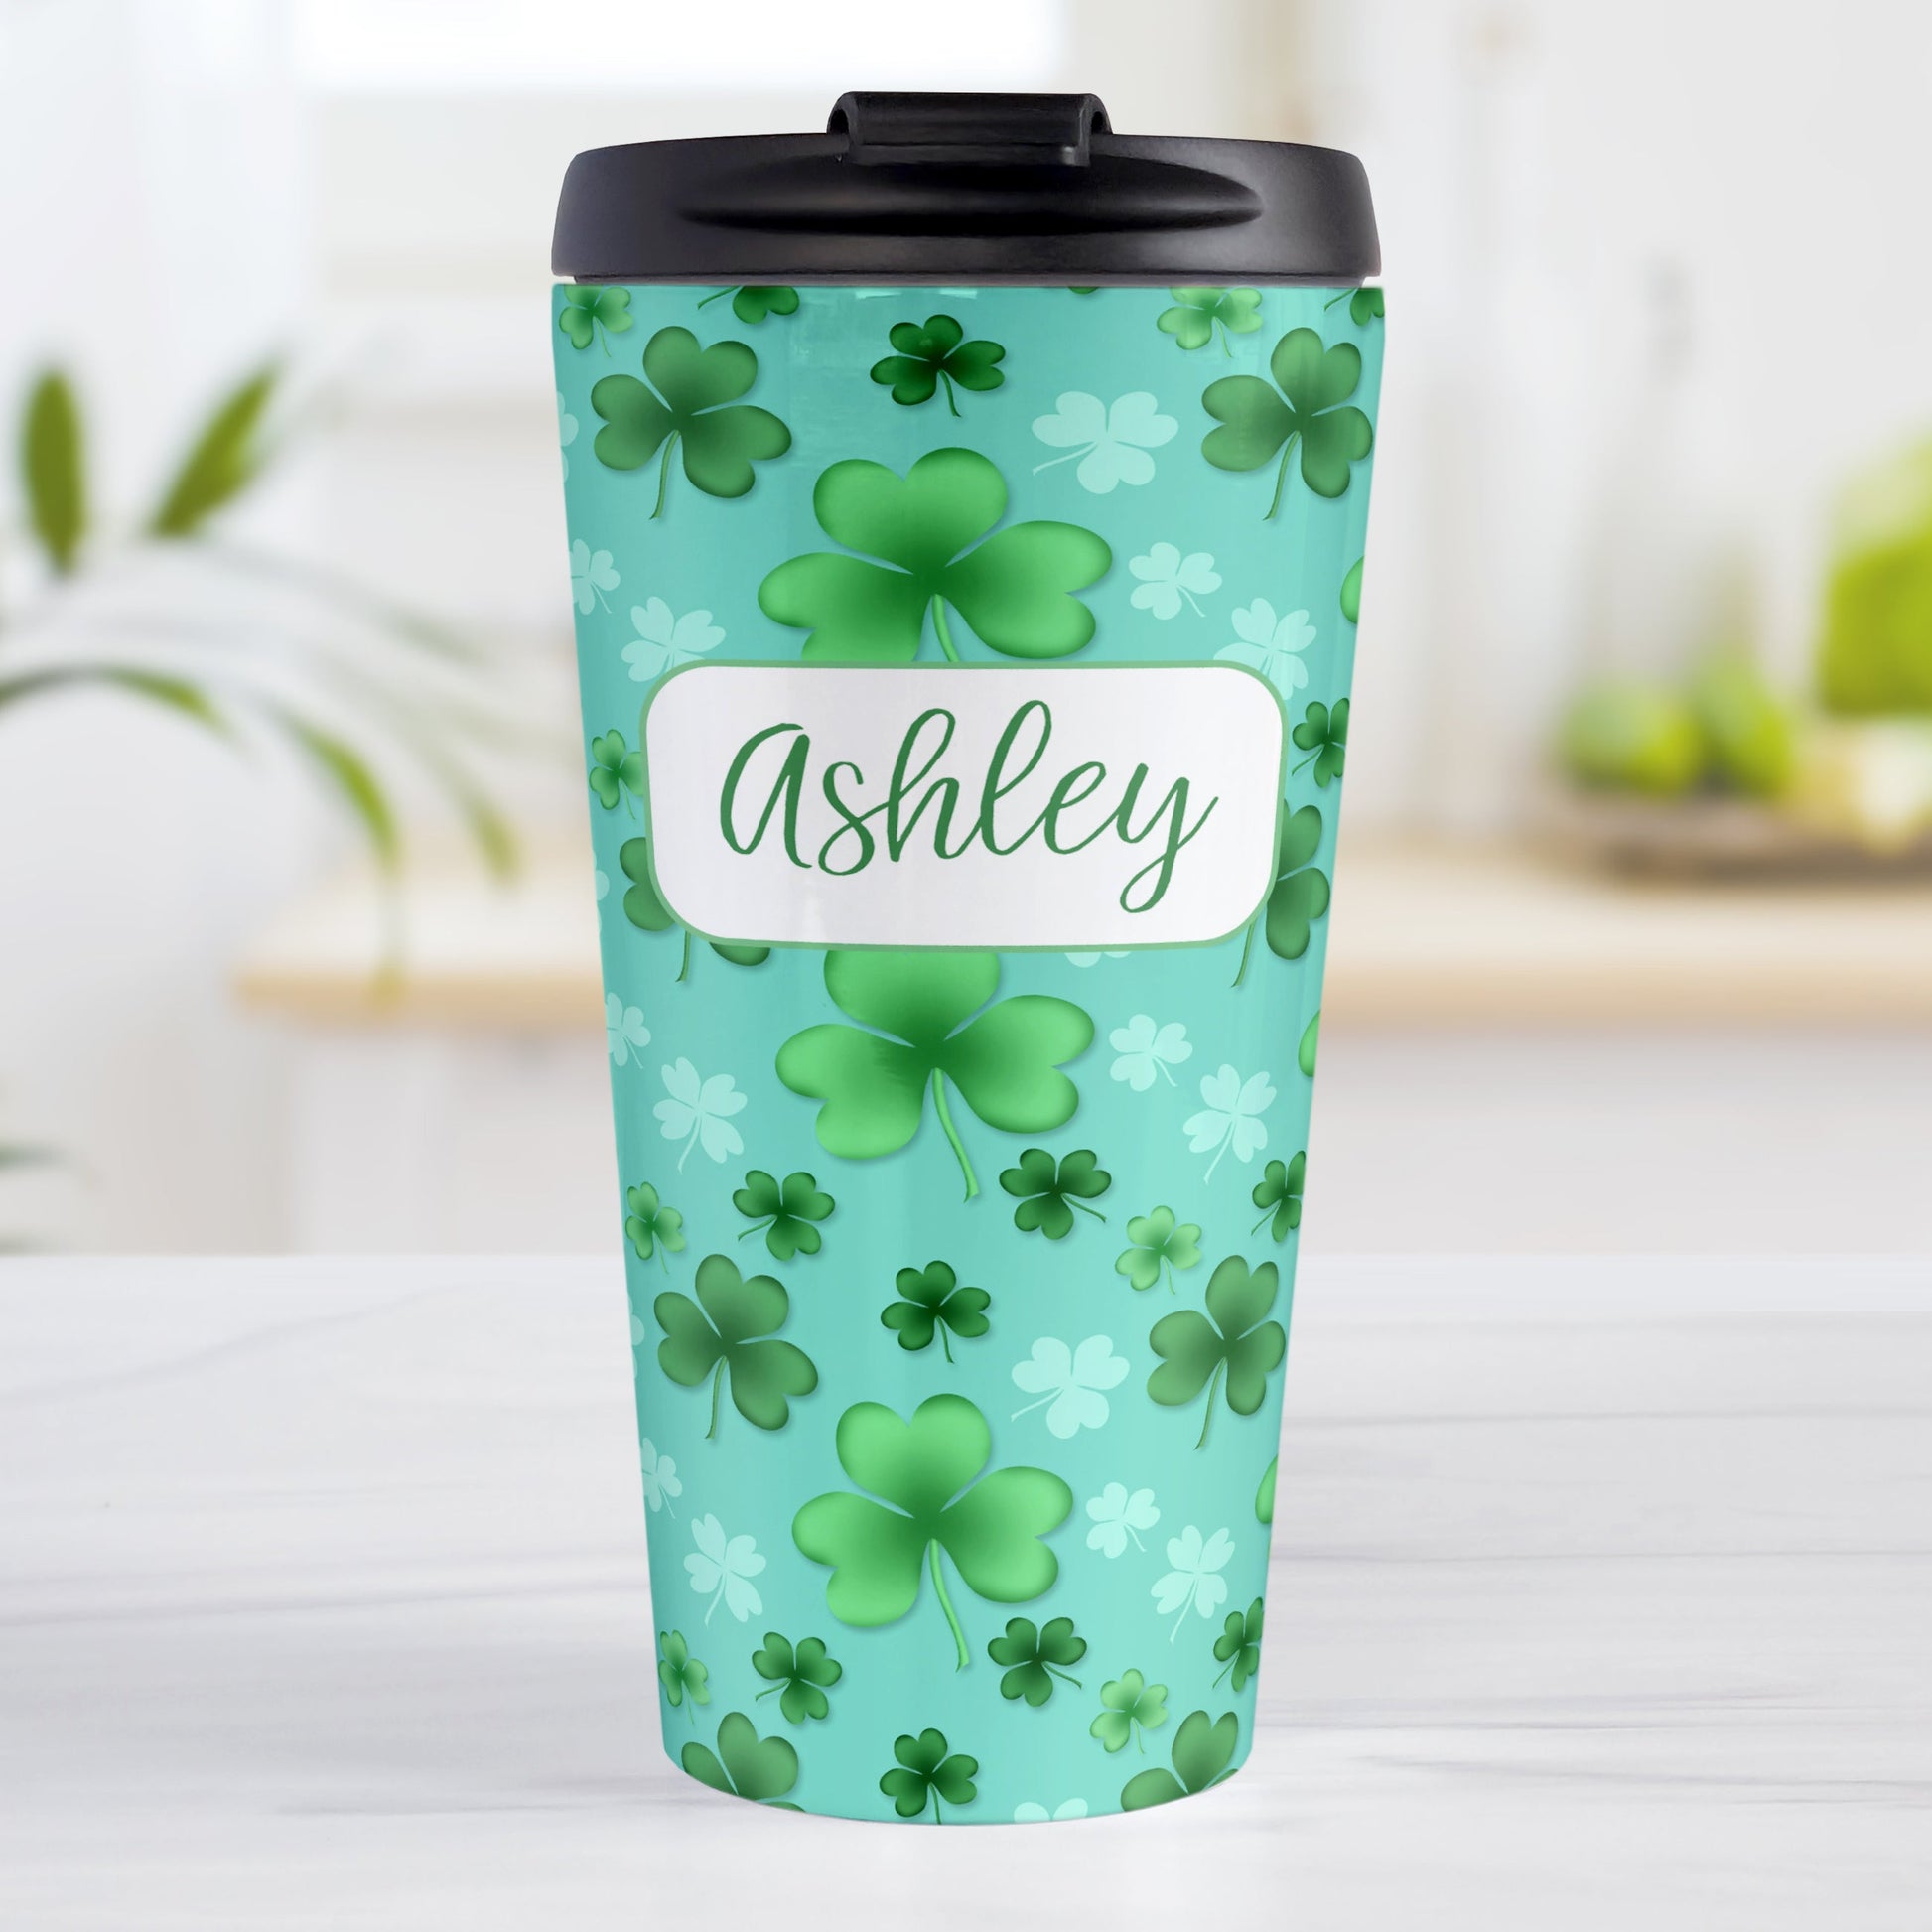 Personalized Lucky Clover Pattern Teal and Green Travel Mug (15oz, stainless steel insulated) at Amy's Coffee Mugs. A travel mug designed with a lucky green clover pattern with a 4-leaf clover among 3-leaf clovers, in different shades of green, over a teal background that wraps around the mug. Your name is personalized in green on white, over the lucky clover pattern.